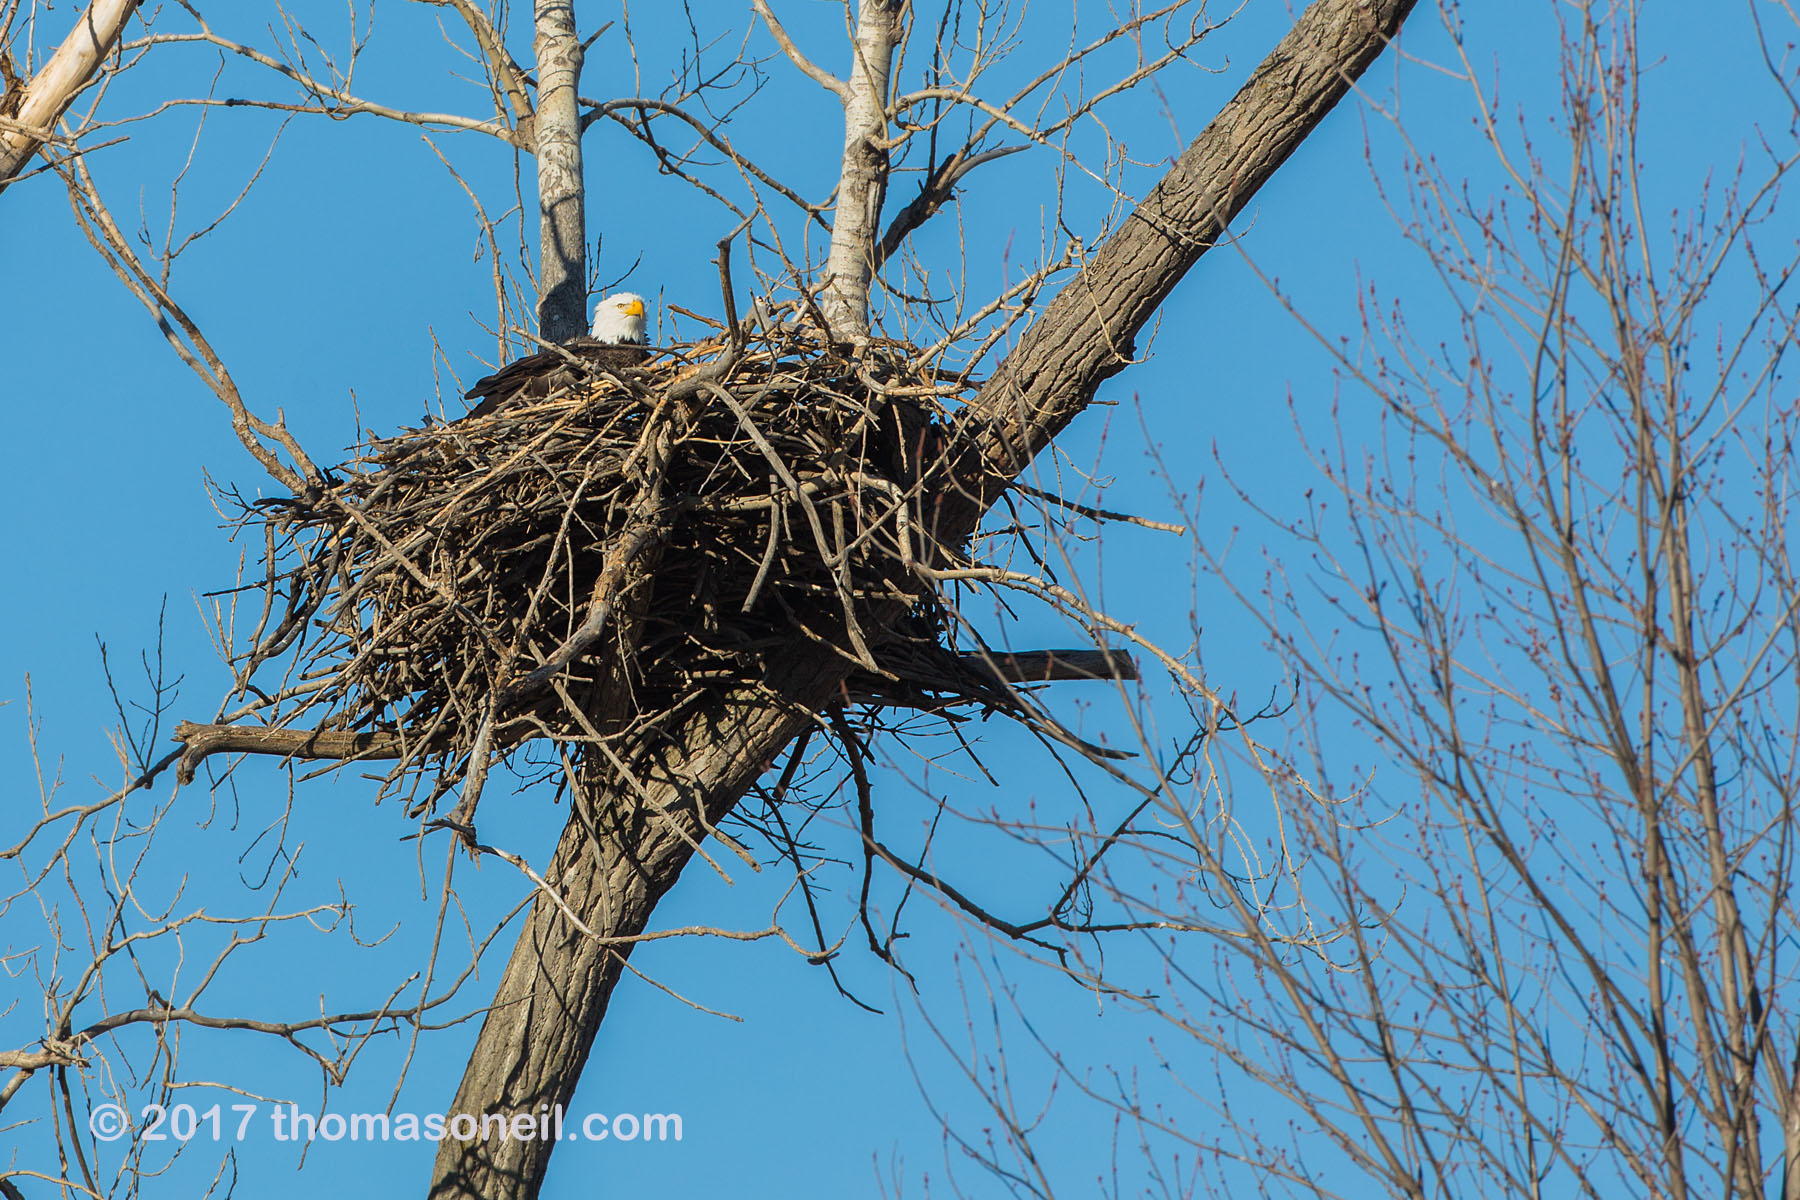 Bald Eagle in nest, Loess Bluffs National Wildlife Refuge, Missouri.  Click for next photo.